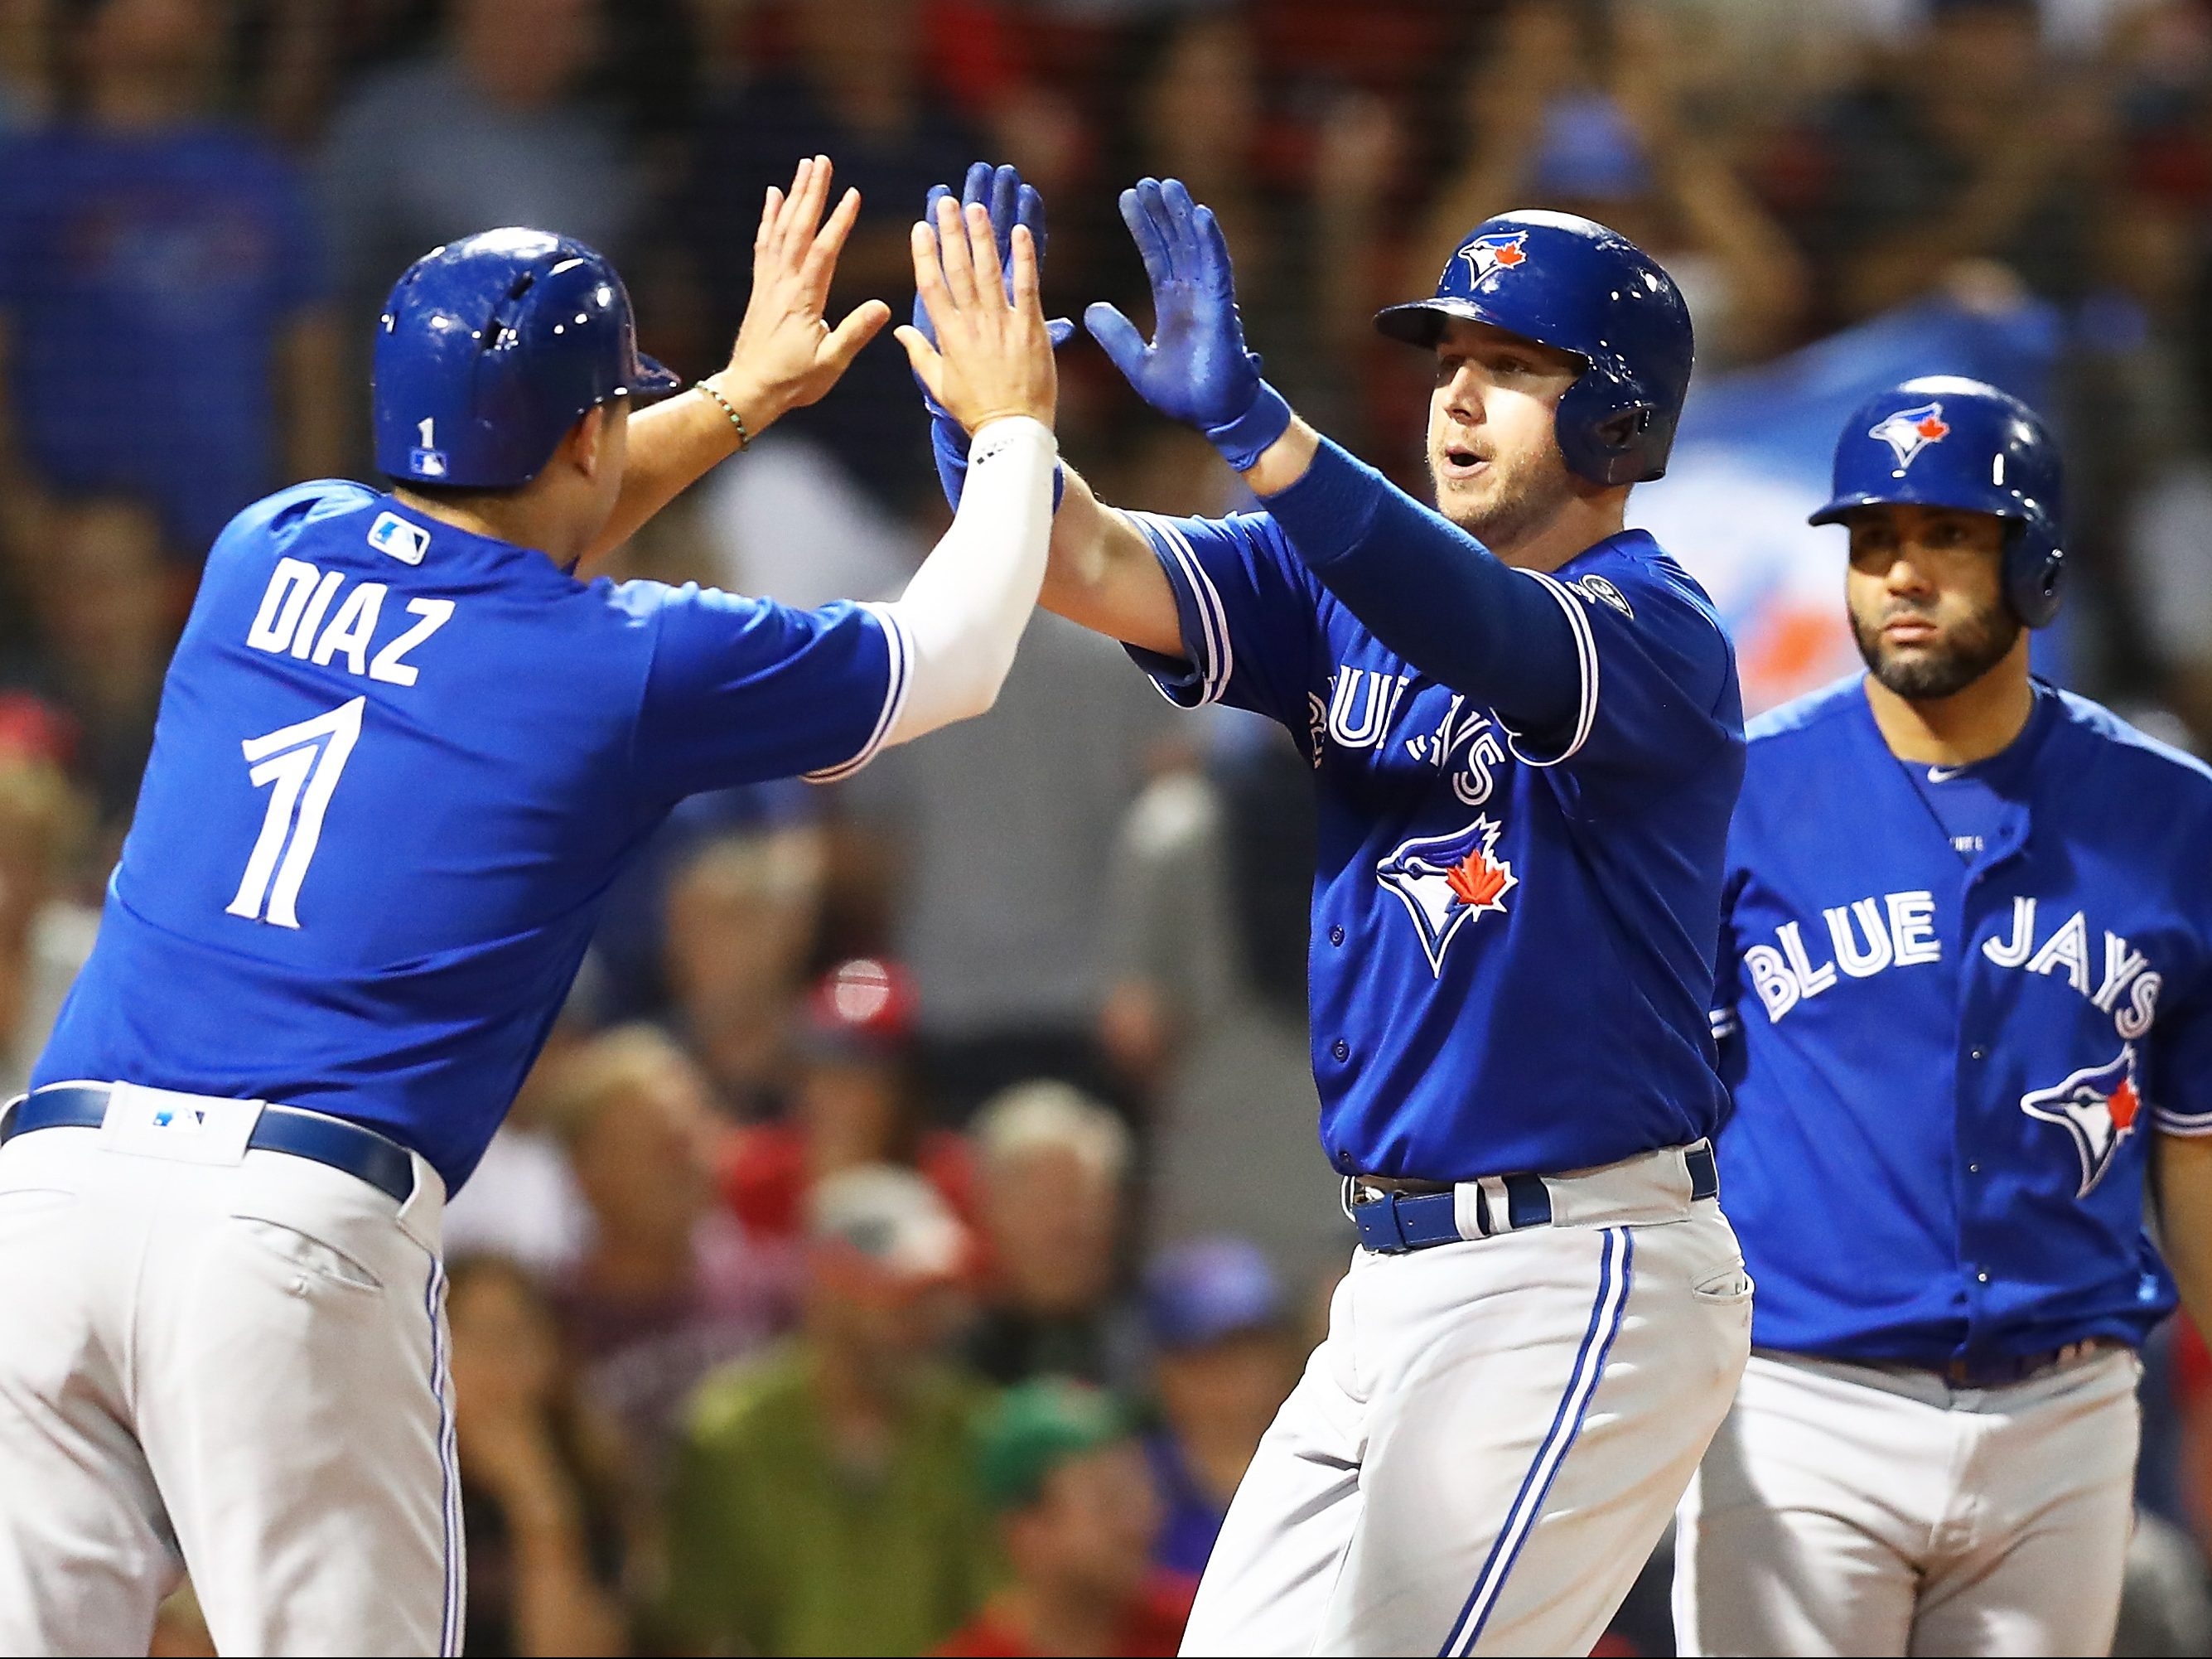 Justin Smoak homers twice as Blue Jays crush Red Sox